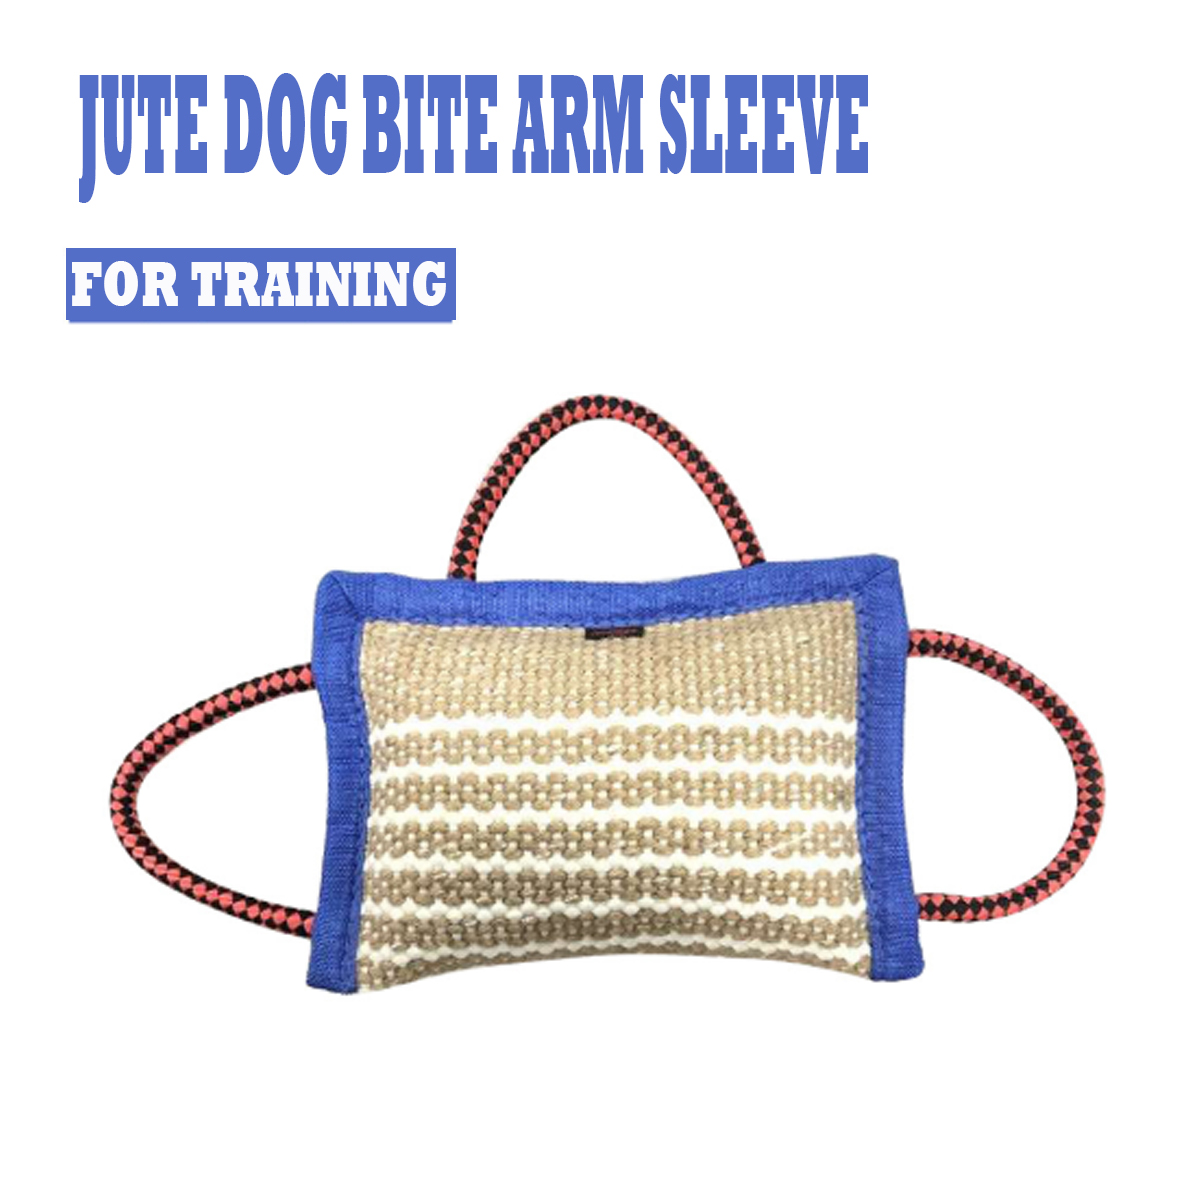 Dog Tug Toy Bite Pillow Strong Pull Dog Training Bite Sleeve Arm Protection For Police Training Pillow Safety Train